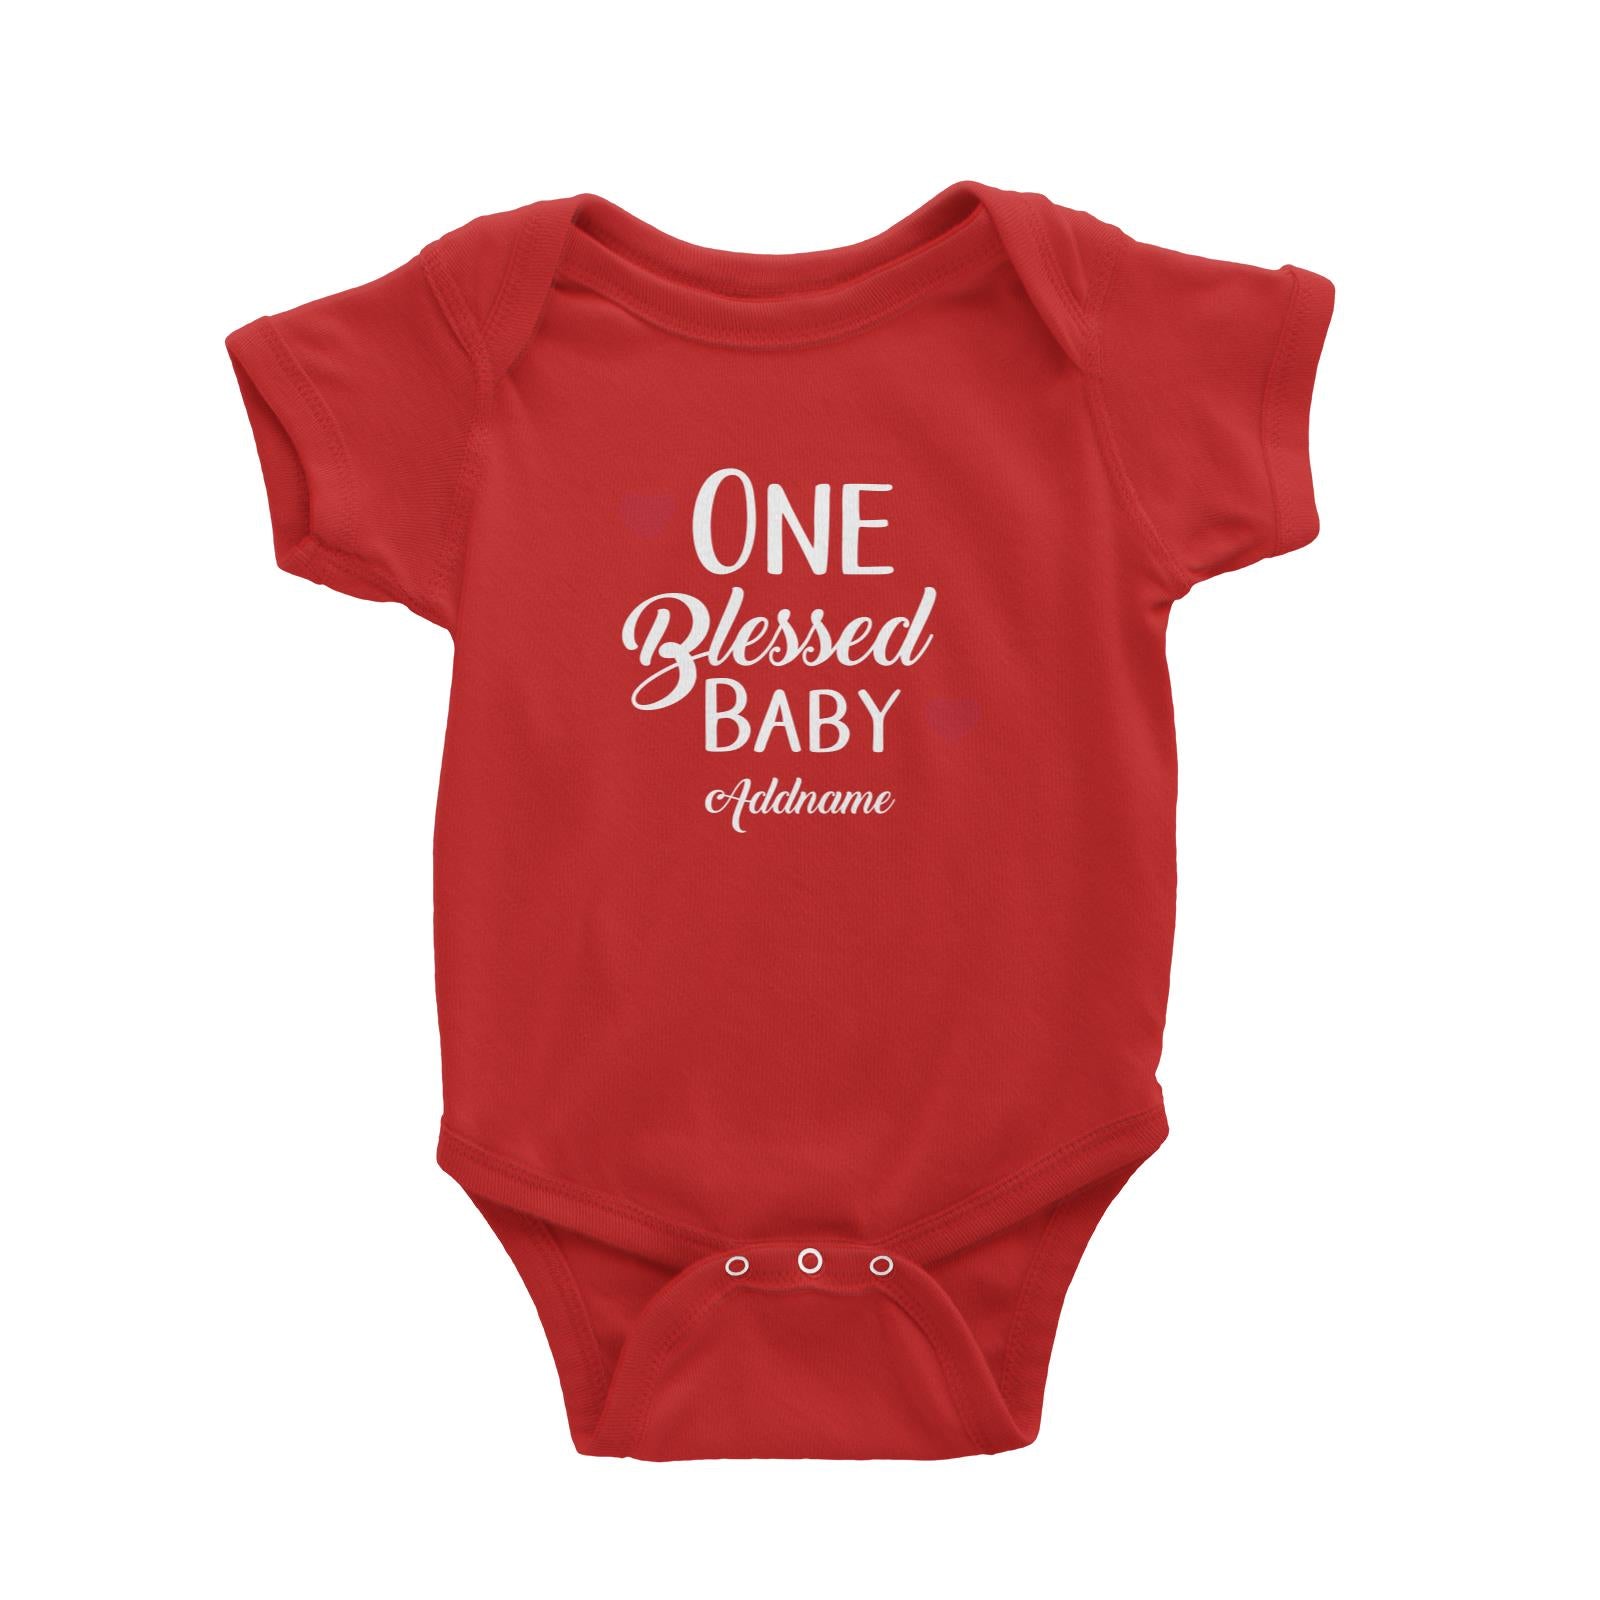 Christian Series One Blessed Baby Addname Baby Romper